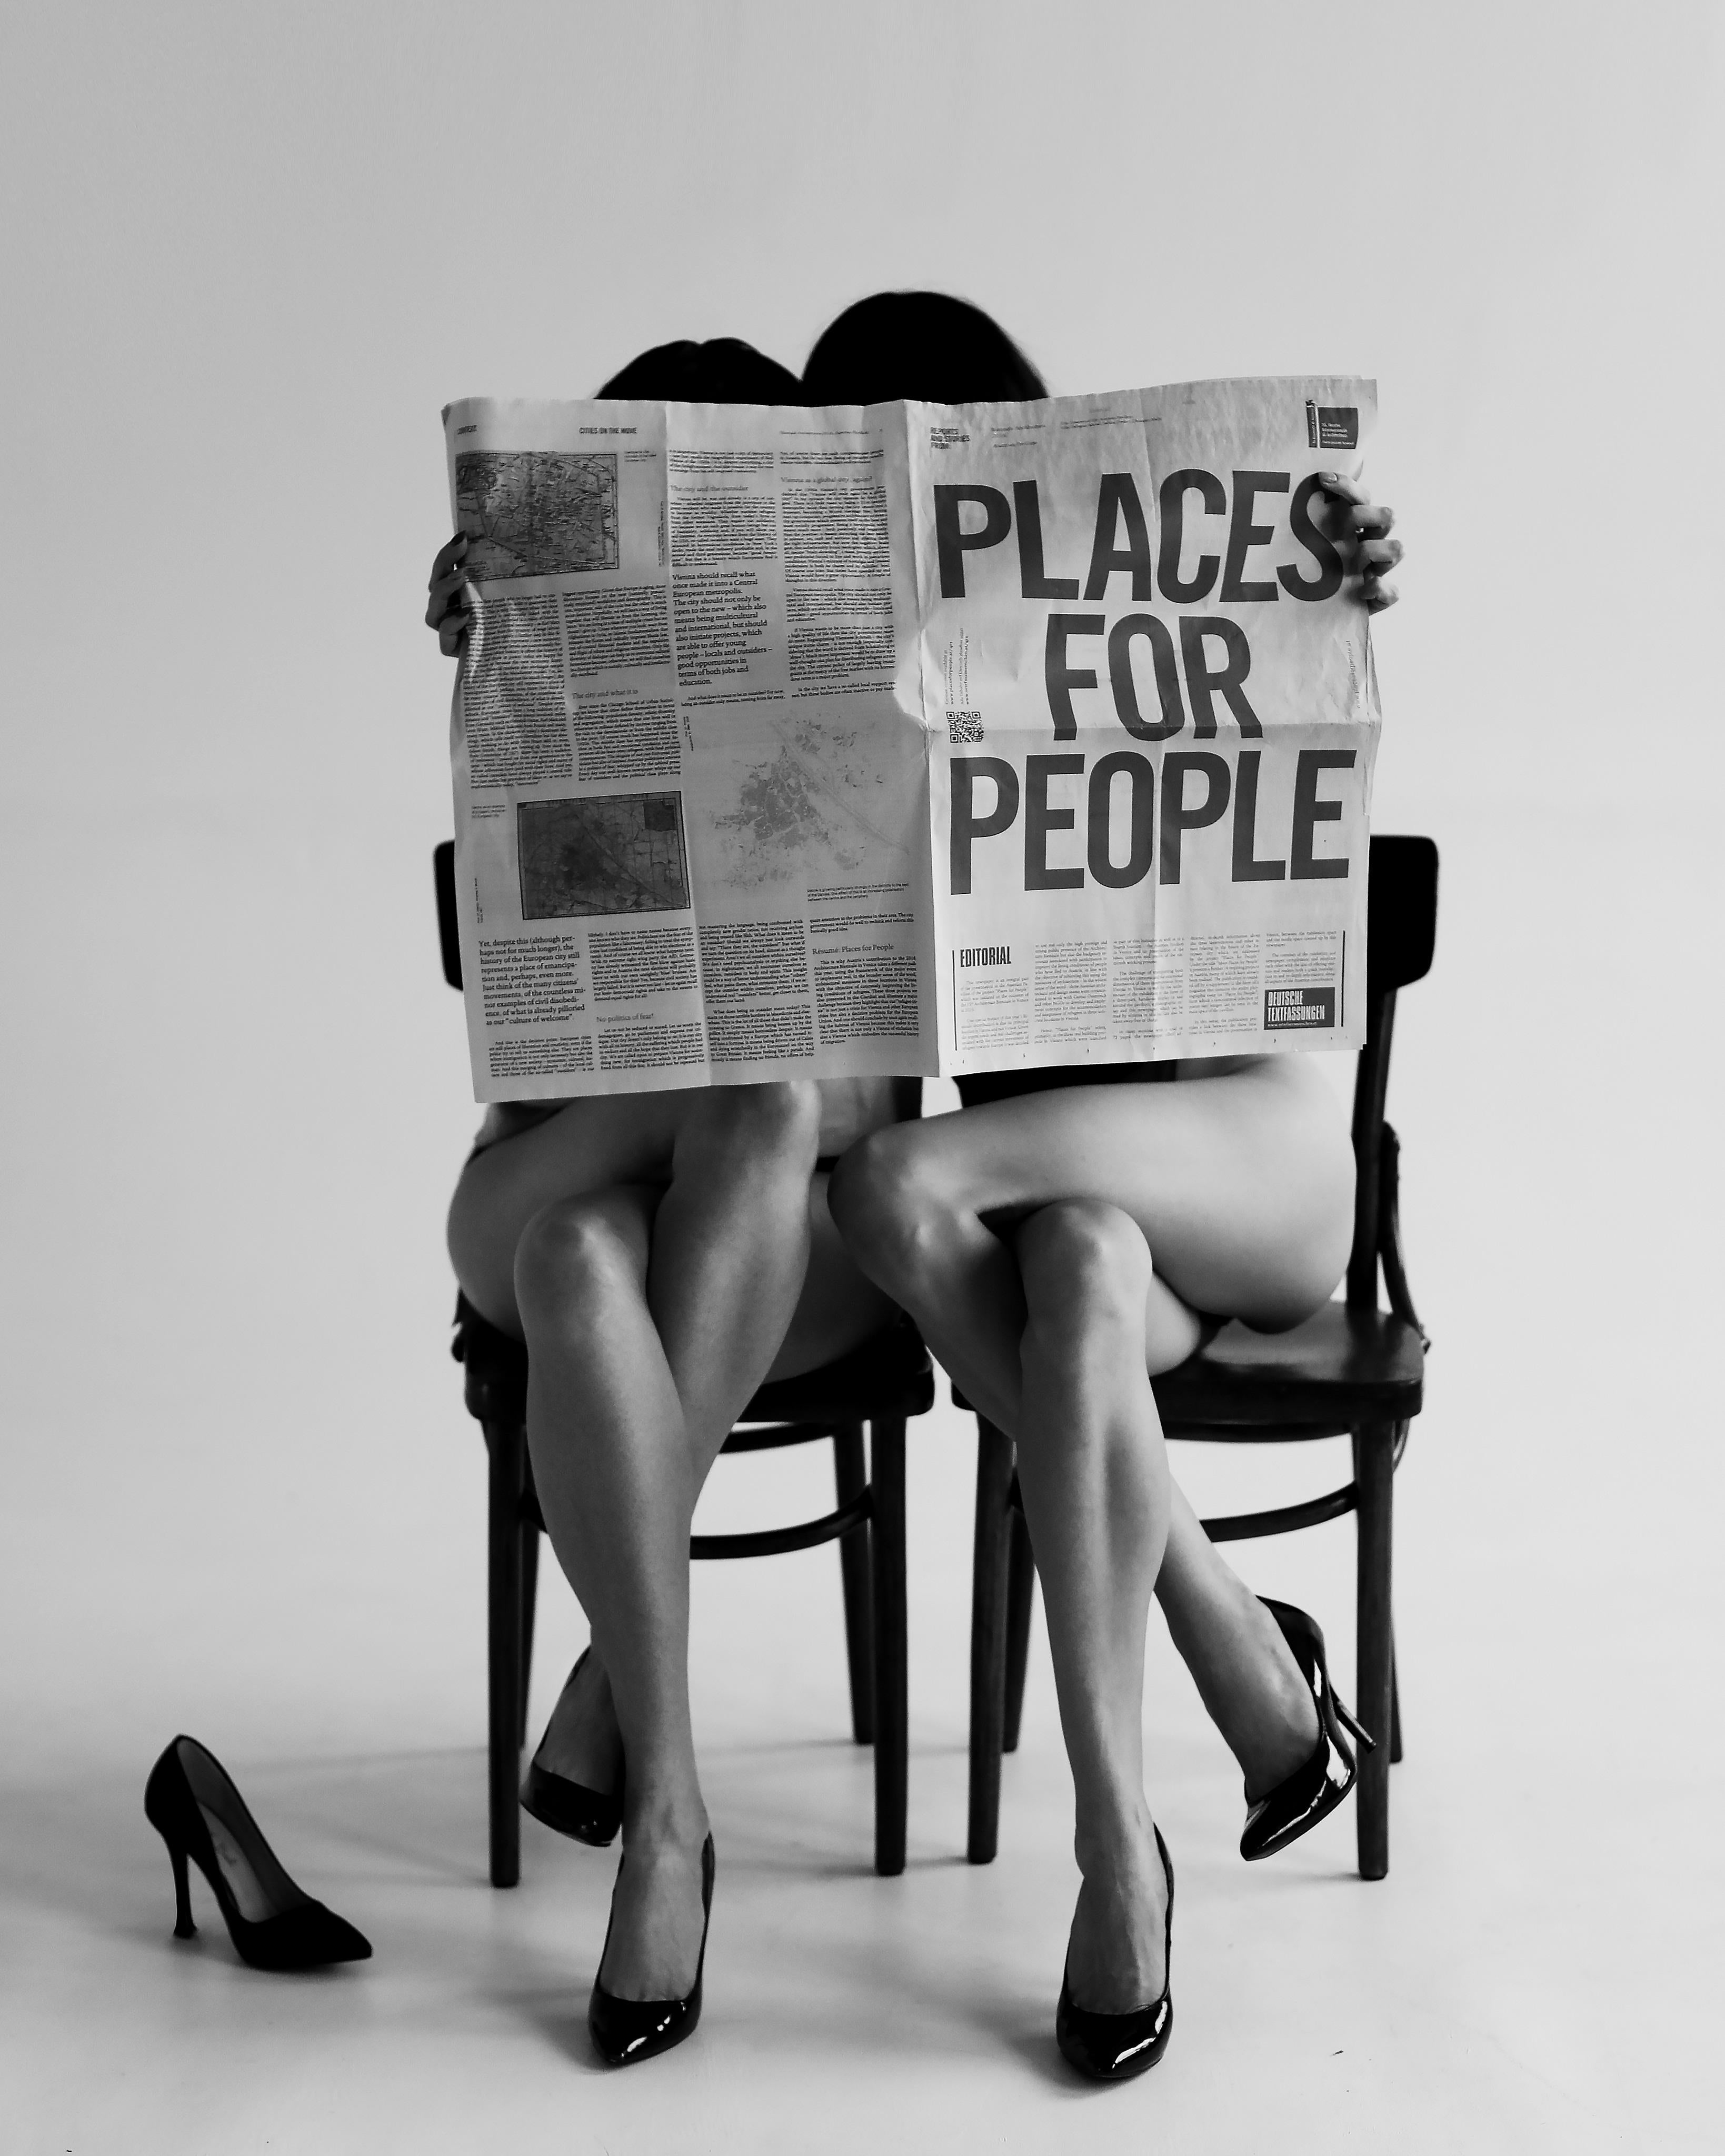 "Place for People" Photography 27.5" x 24" inch Edition of 15 by Olha Stepanian

Printed on Epson Professional Paper
Signed and numbered by the artist 

Not framed. Ships in a tube. 


Olha Stepanian was born and raised in Ukraine, where she